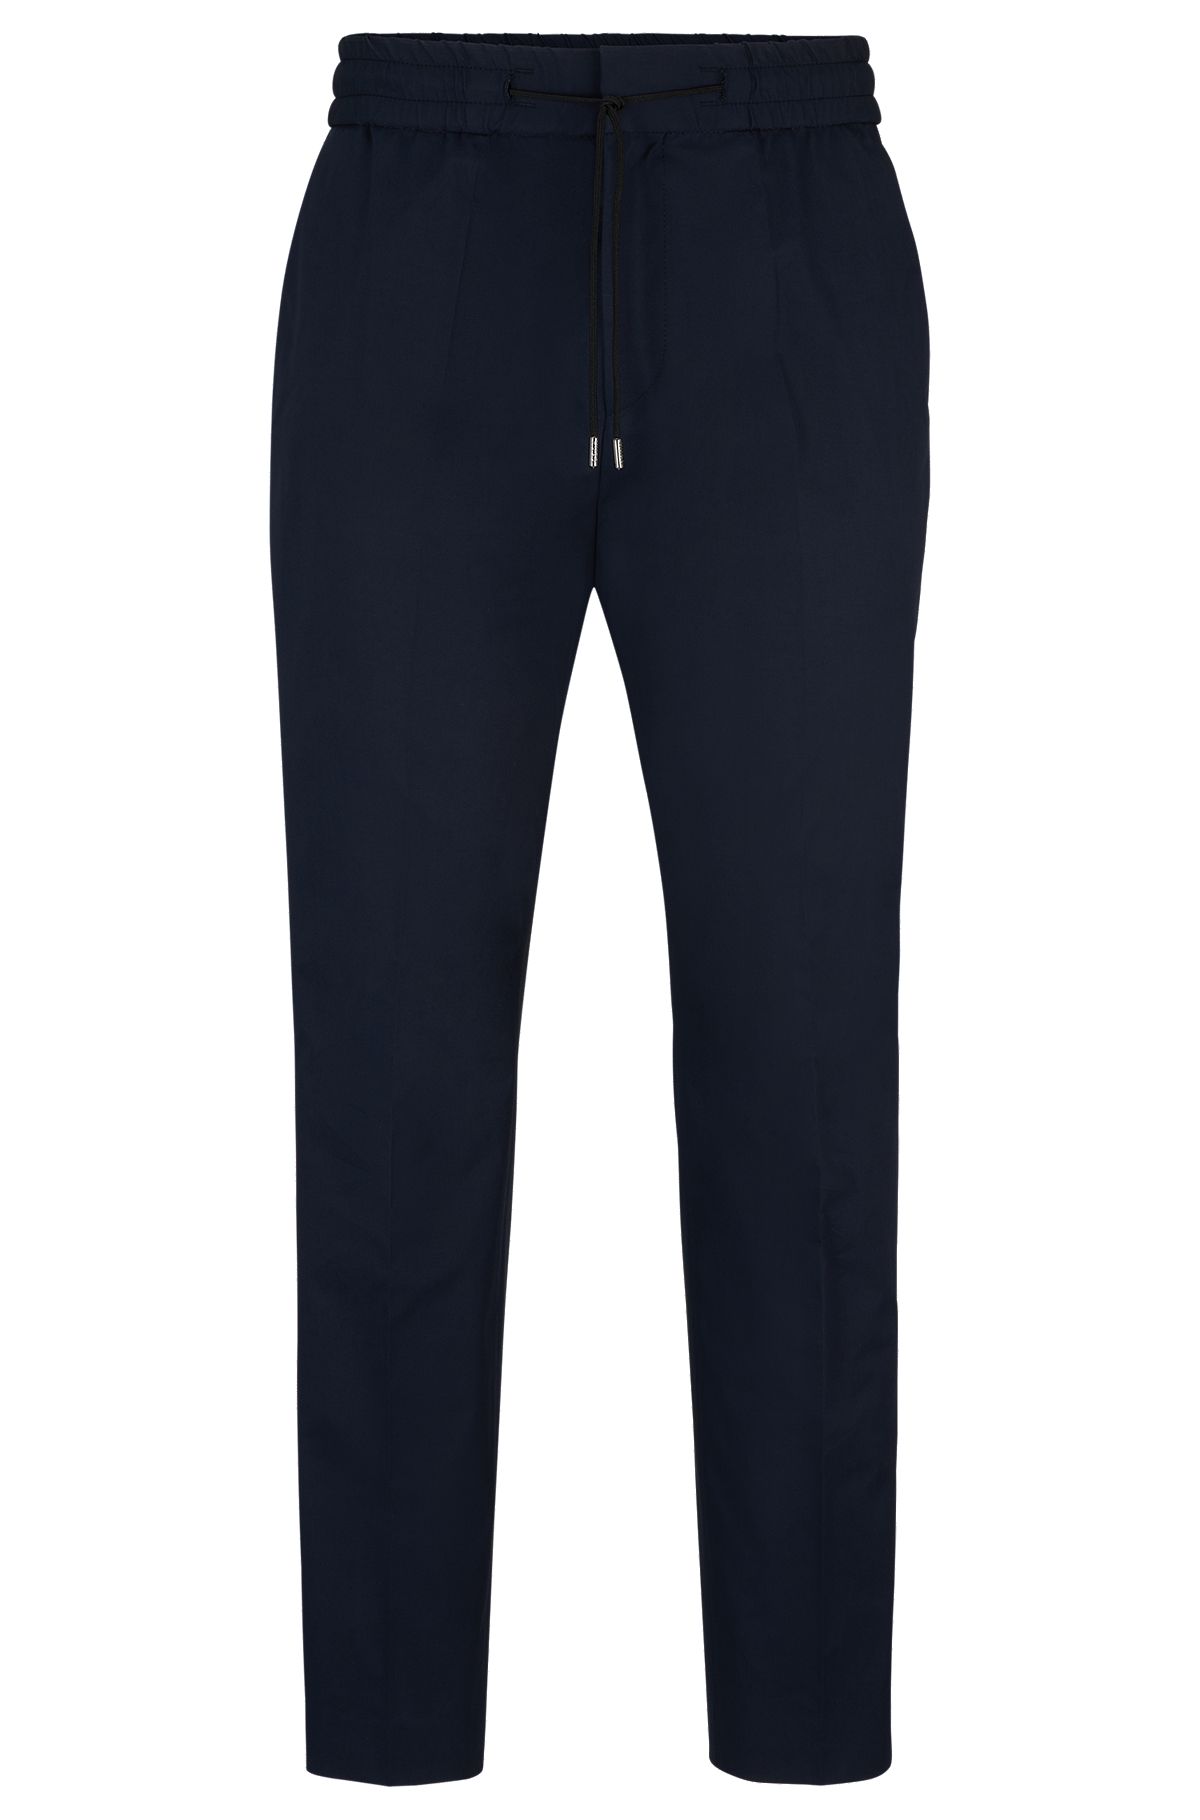 Performance-stretch cotton trousers with drawcord waist, Dark Blue